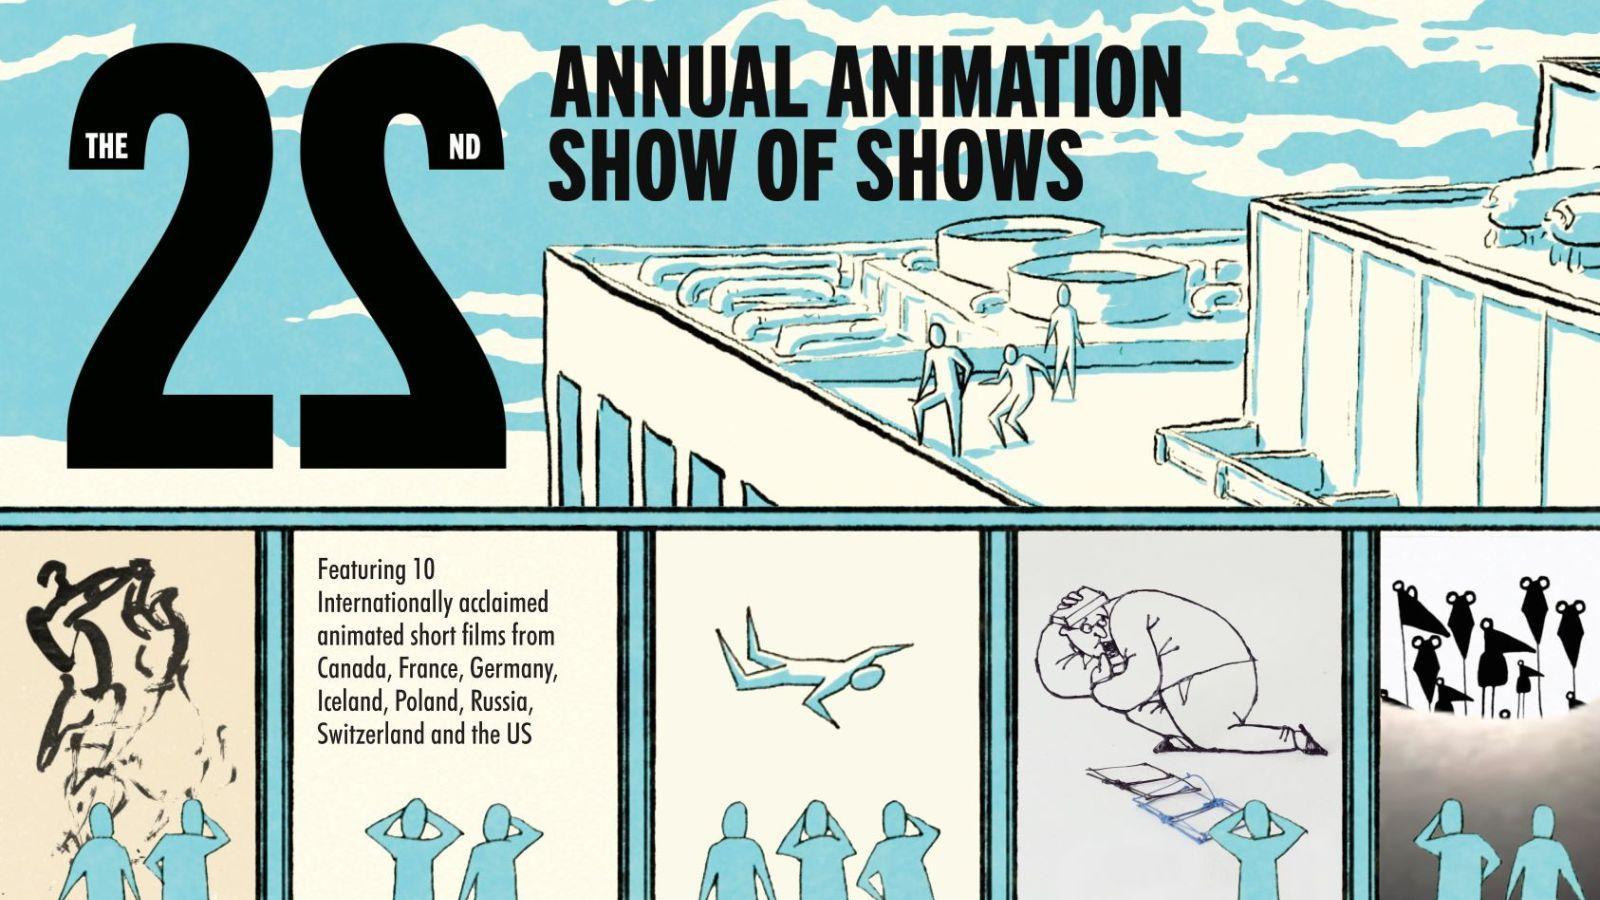 The 22nd Annual Animation Show of Shows